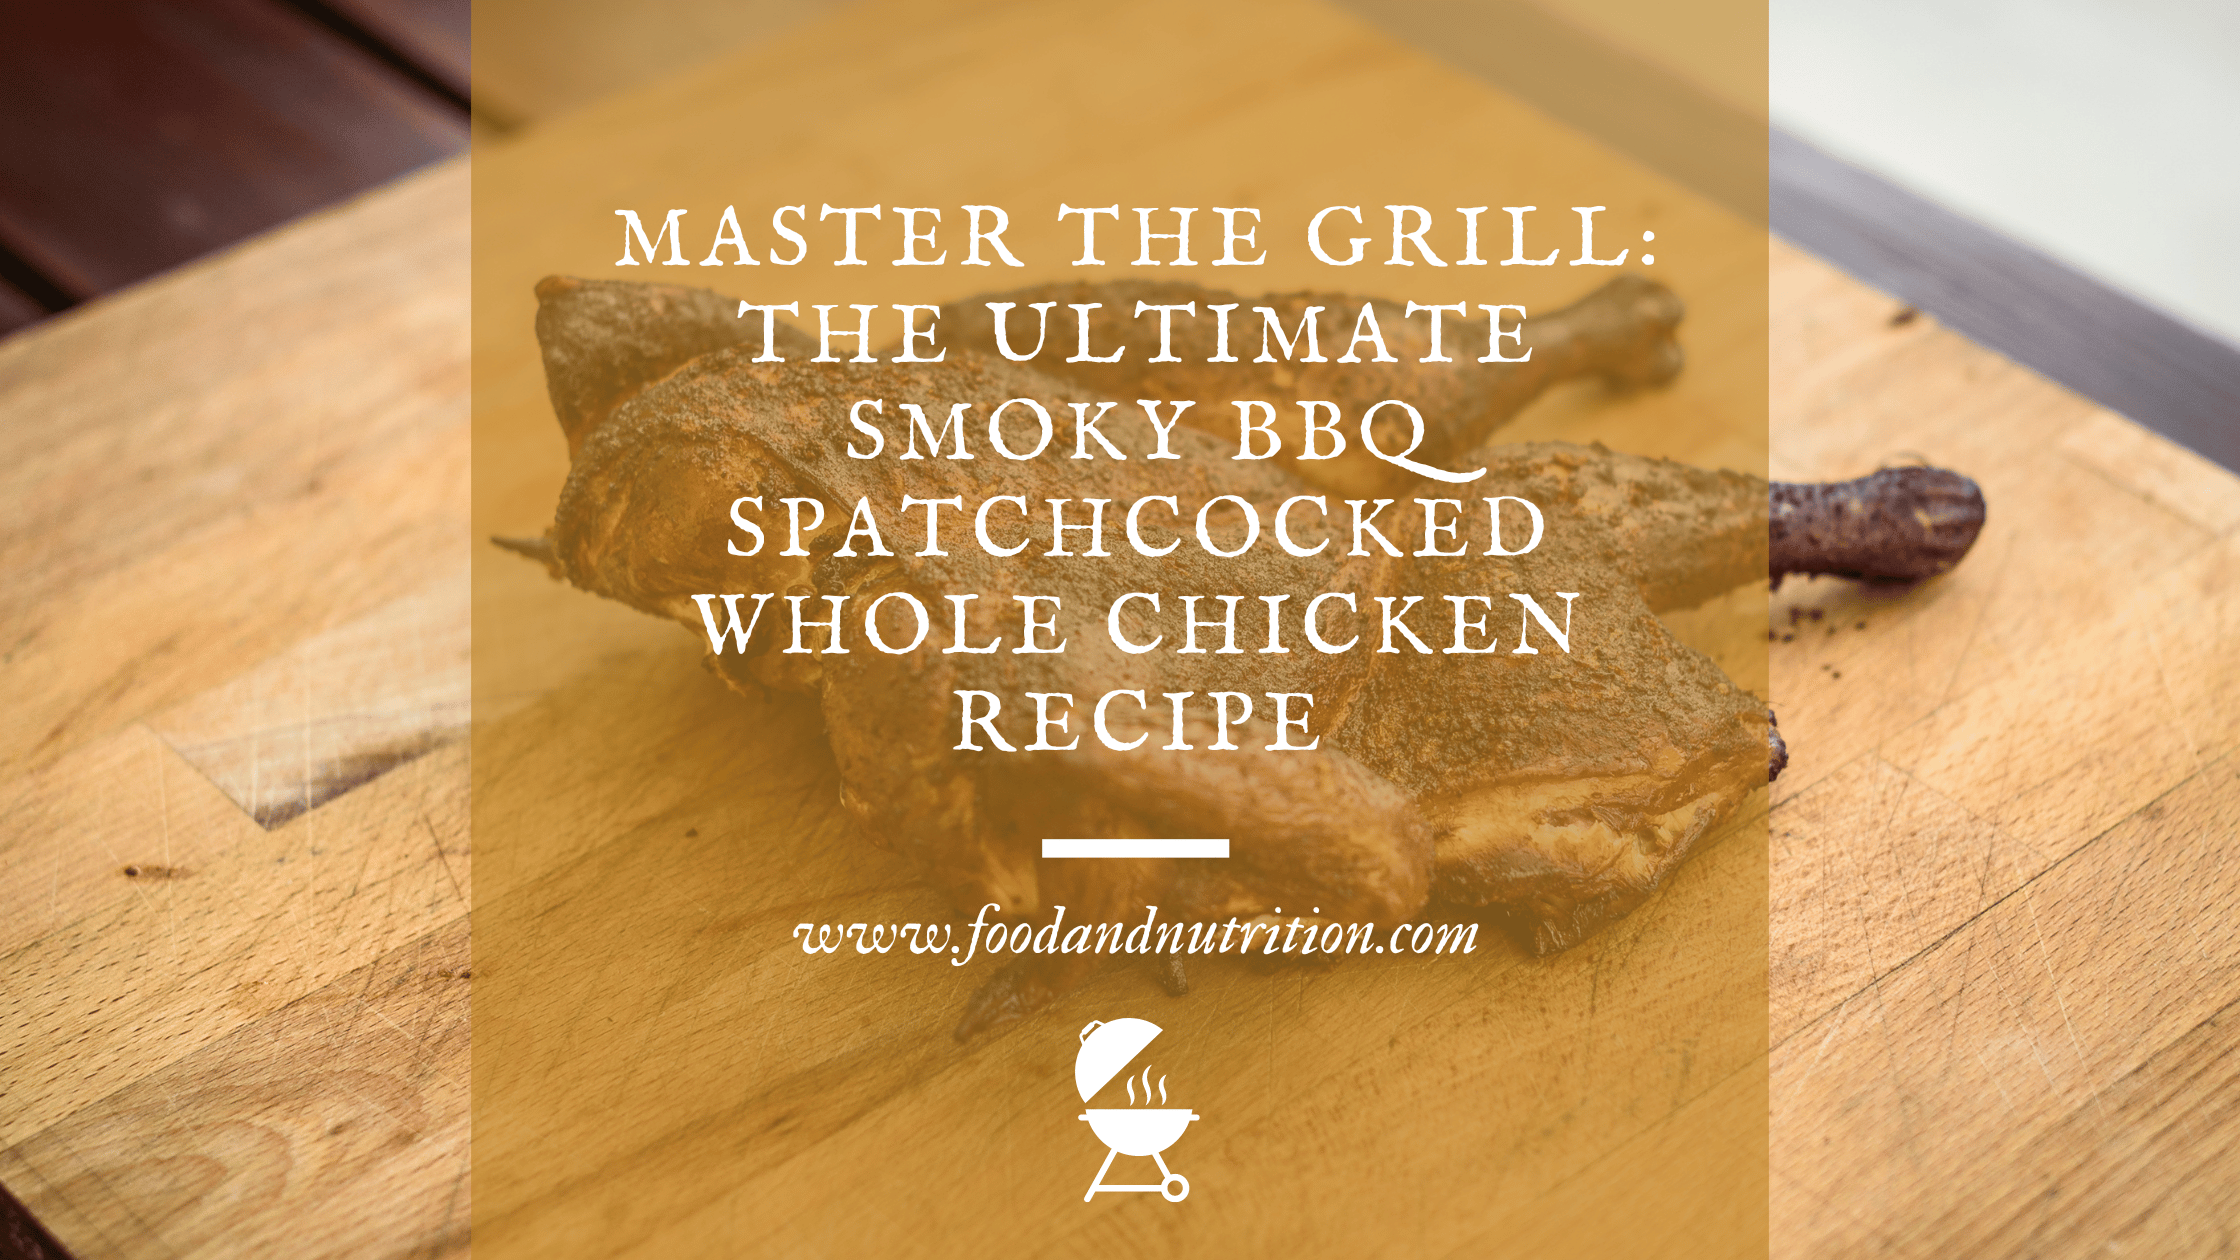 Master the Grill: The Ultimate Smoky BBQ Spatchcocked Whole Chicken Recipe